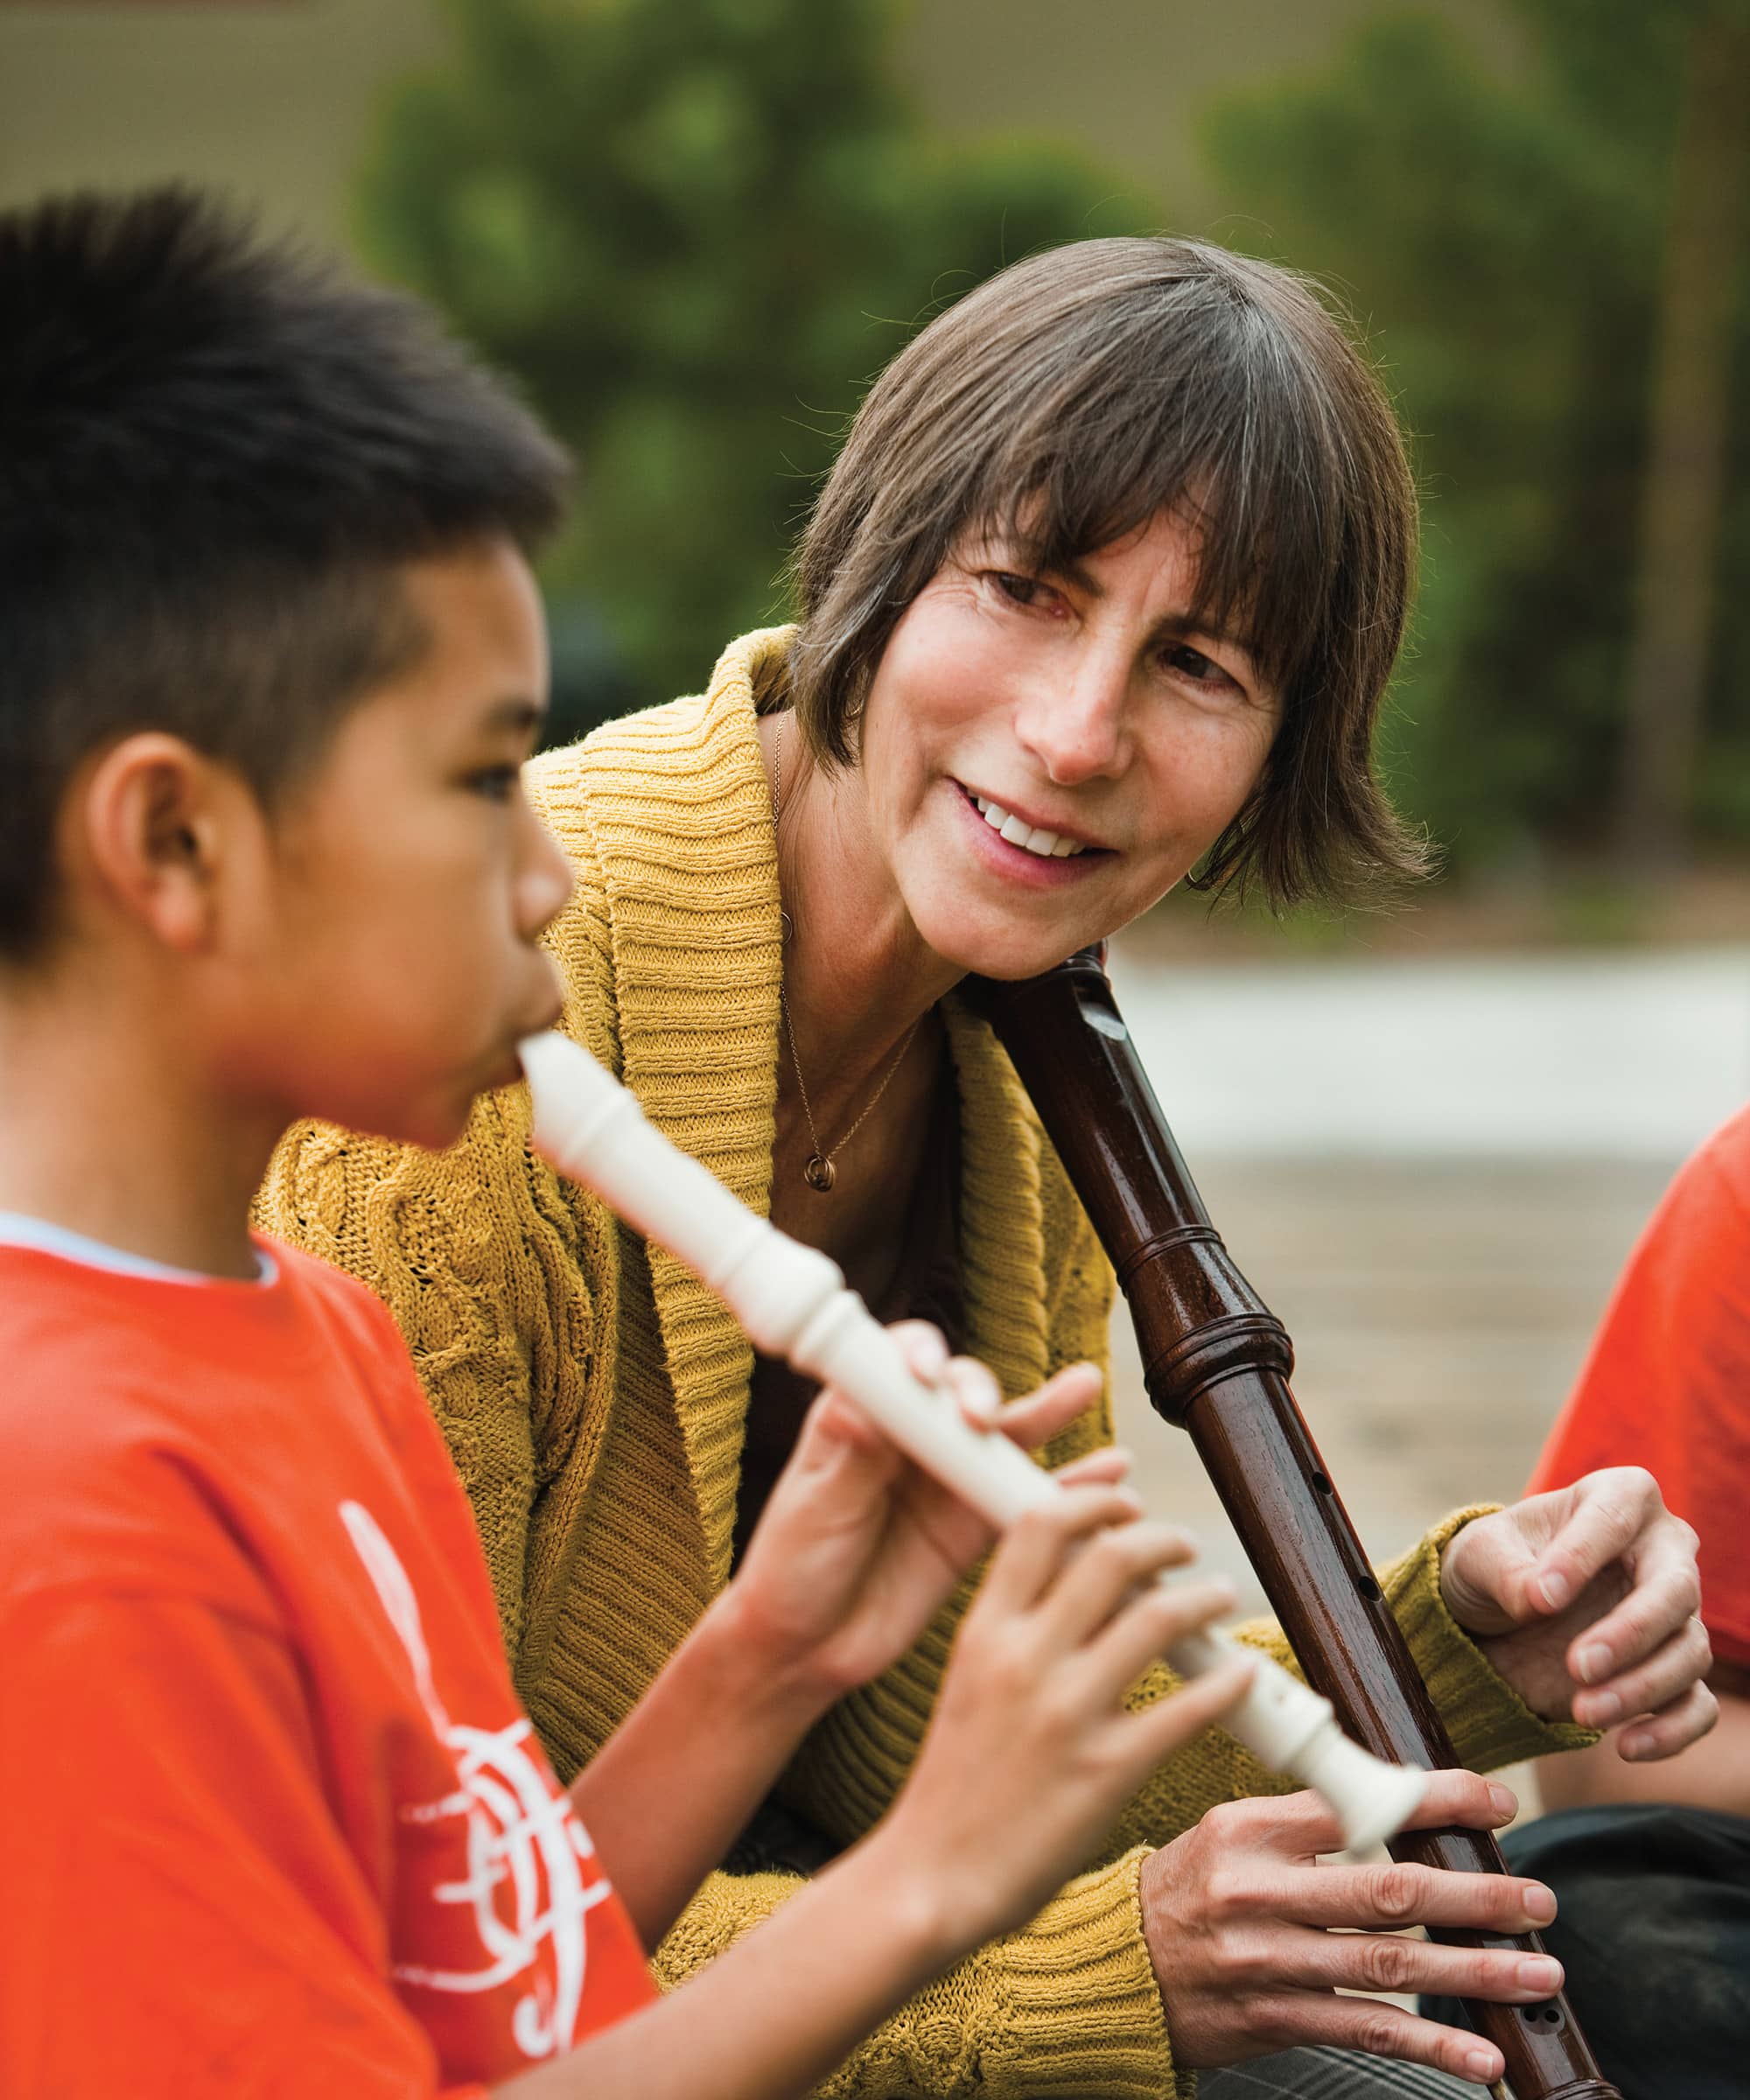 A person, with short dark hair wearing a yellow sweater holding an instrument, faces a child with short dark hair wearing a bright orange shirt playing the flute.